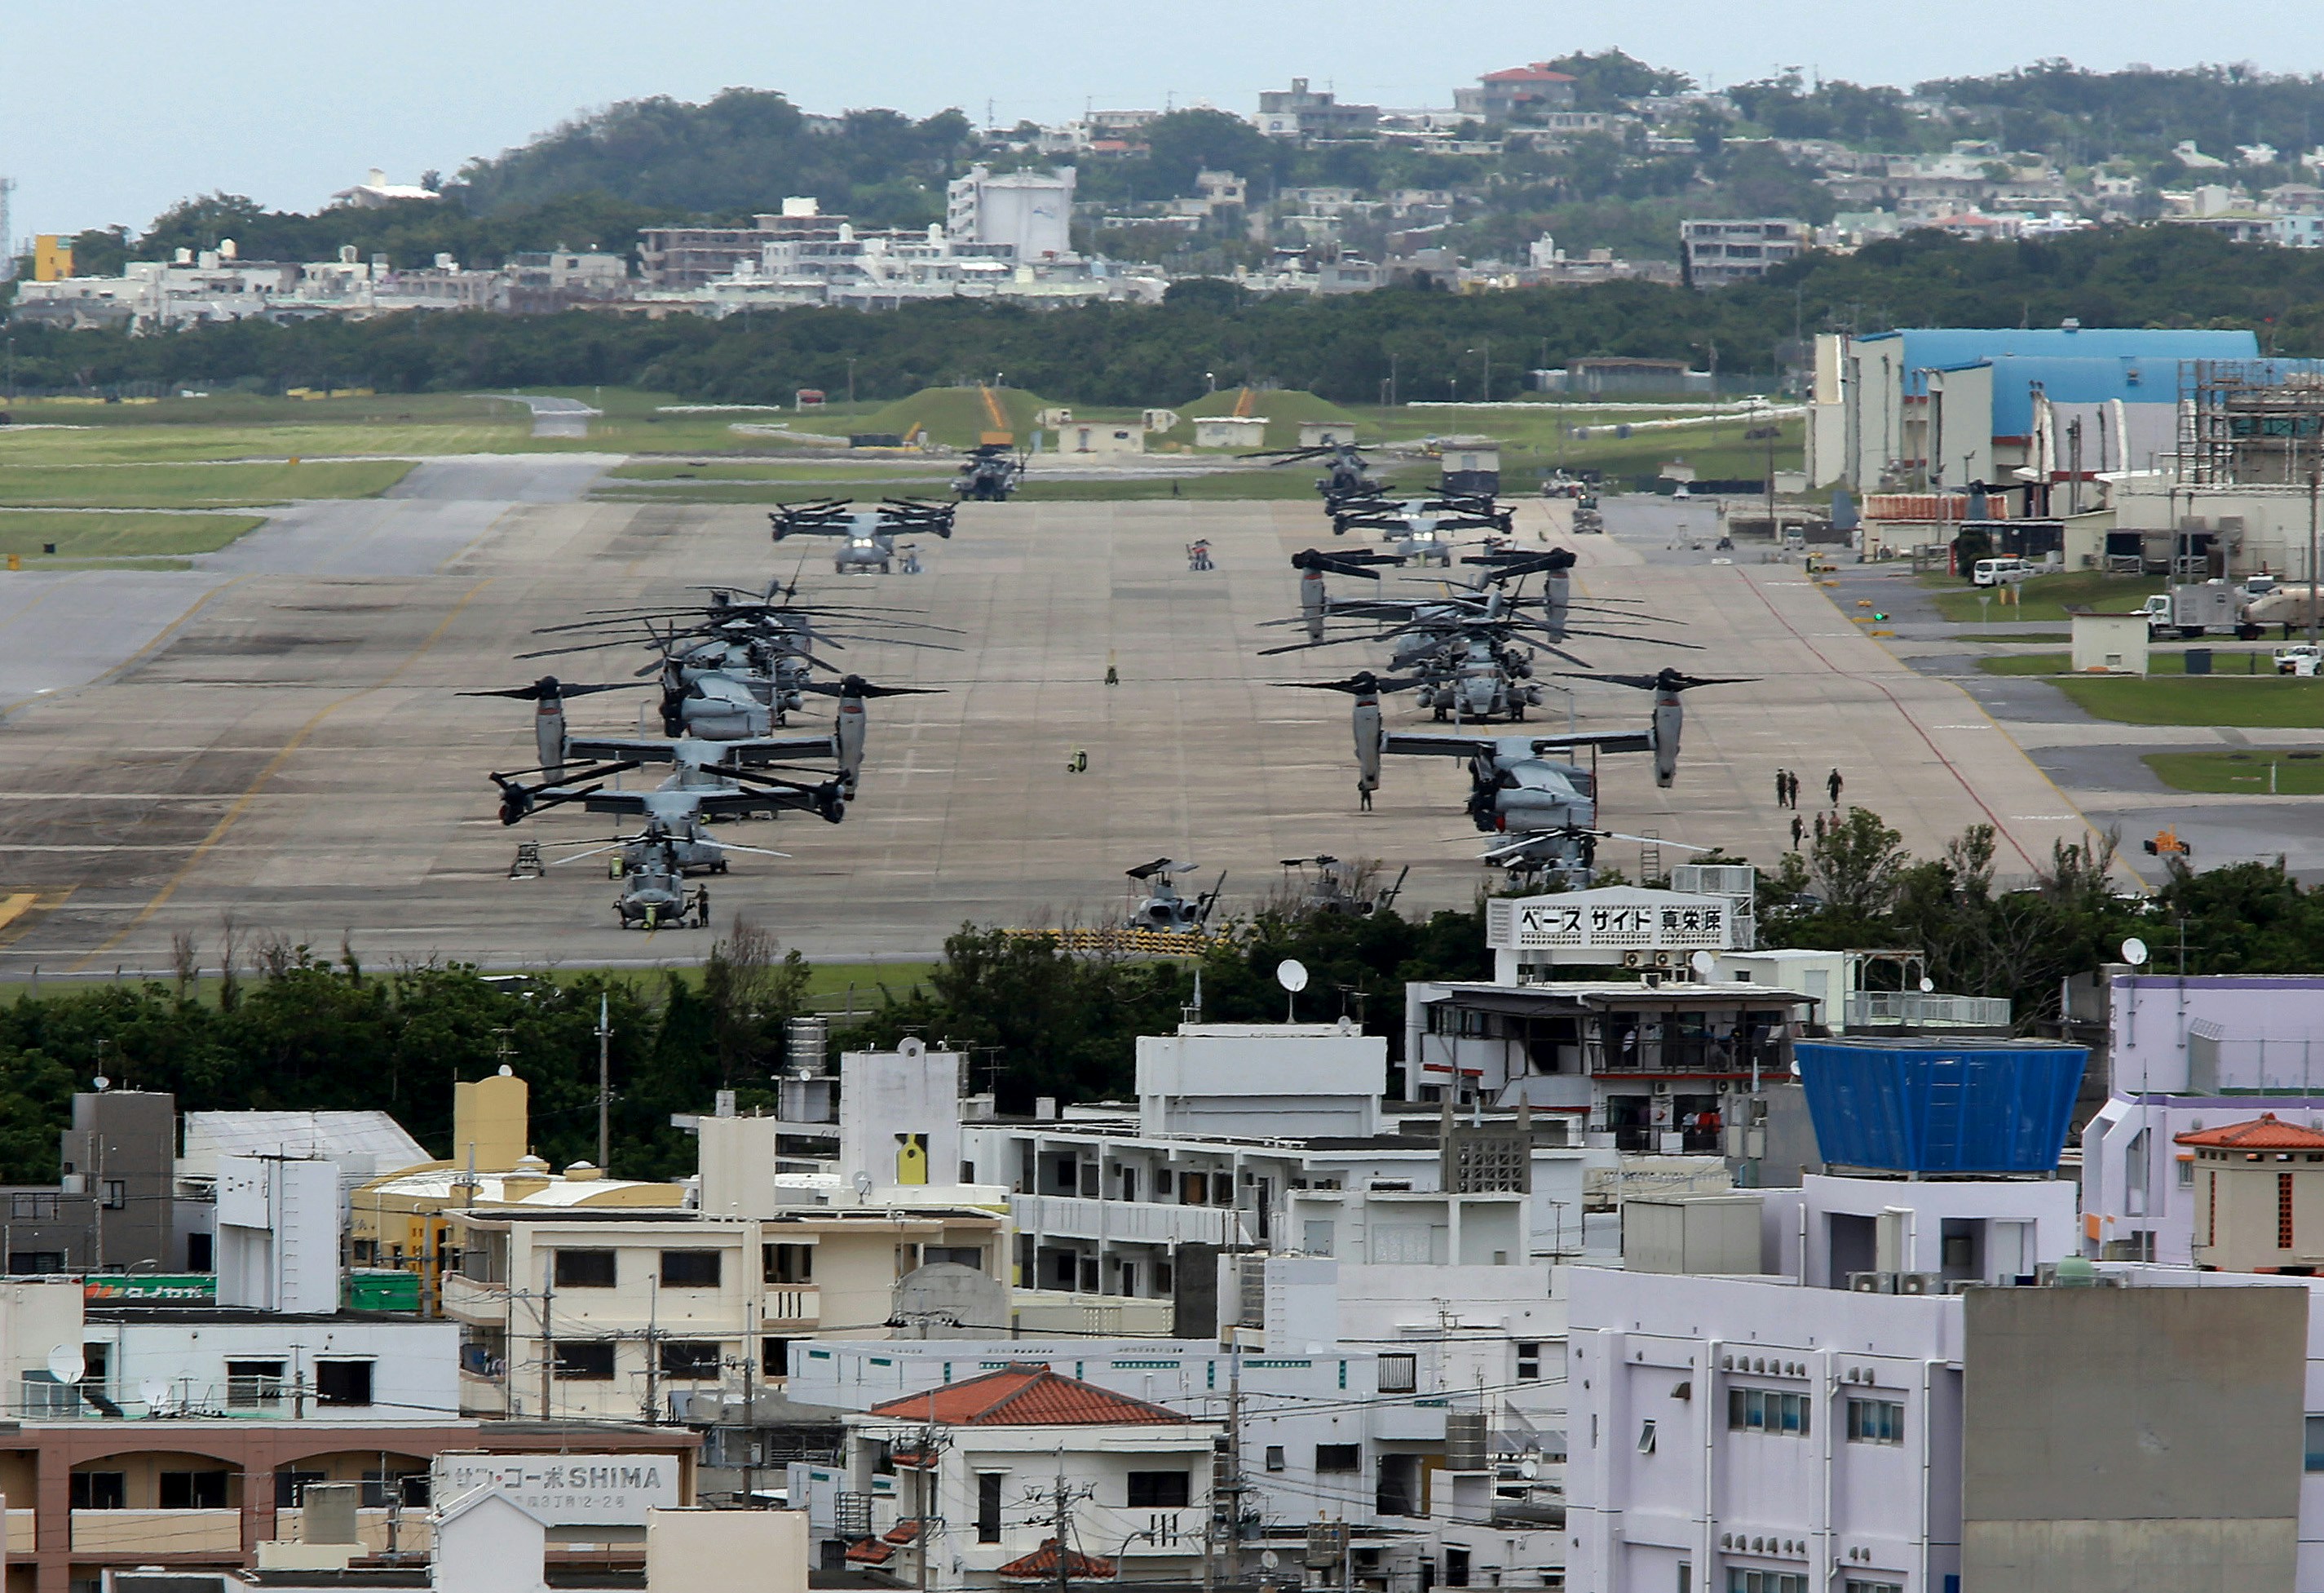 epa04756429 US Marine Corps MV-22 Osprey aircrafts are sitting on the tarmac at US Marine Corps Air Station Futenma surrounded by overcrowded residential areas in Ginowan on Okinawa Island, southwestern Japan, 19 May 2015. Japanese government just announced on May 12 that CV-22 Ospreys would be deployed to the U.S. Air Force's Yokota base on the outskirt of Tokyo. CV-22 Ospreys is for special operations forces, engage in low-altitude and nighttime flights, and the accident rate is three times higher than Marines MV-22 Ospreys. Japanese four local cities' leaders in Tokyo surrounding US Air Force's Yokota Base have expressed deep concern over the deployment of CV-22 Ospreys in 2017, as Pentagon announced on 18 May 2015 it had no plan to change Osprey operations in Japan after a CV-22 Osprey crash in Hawaii killing one and injuring 21 on last weekend.  EPA/HITOSHI MAESHIRO